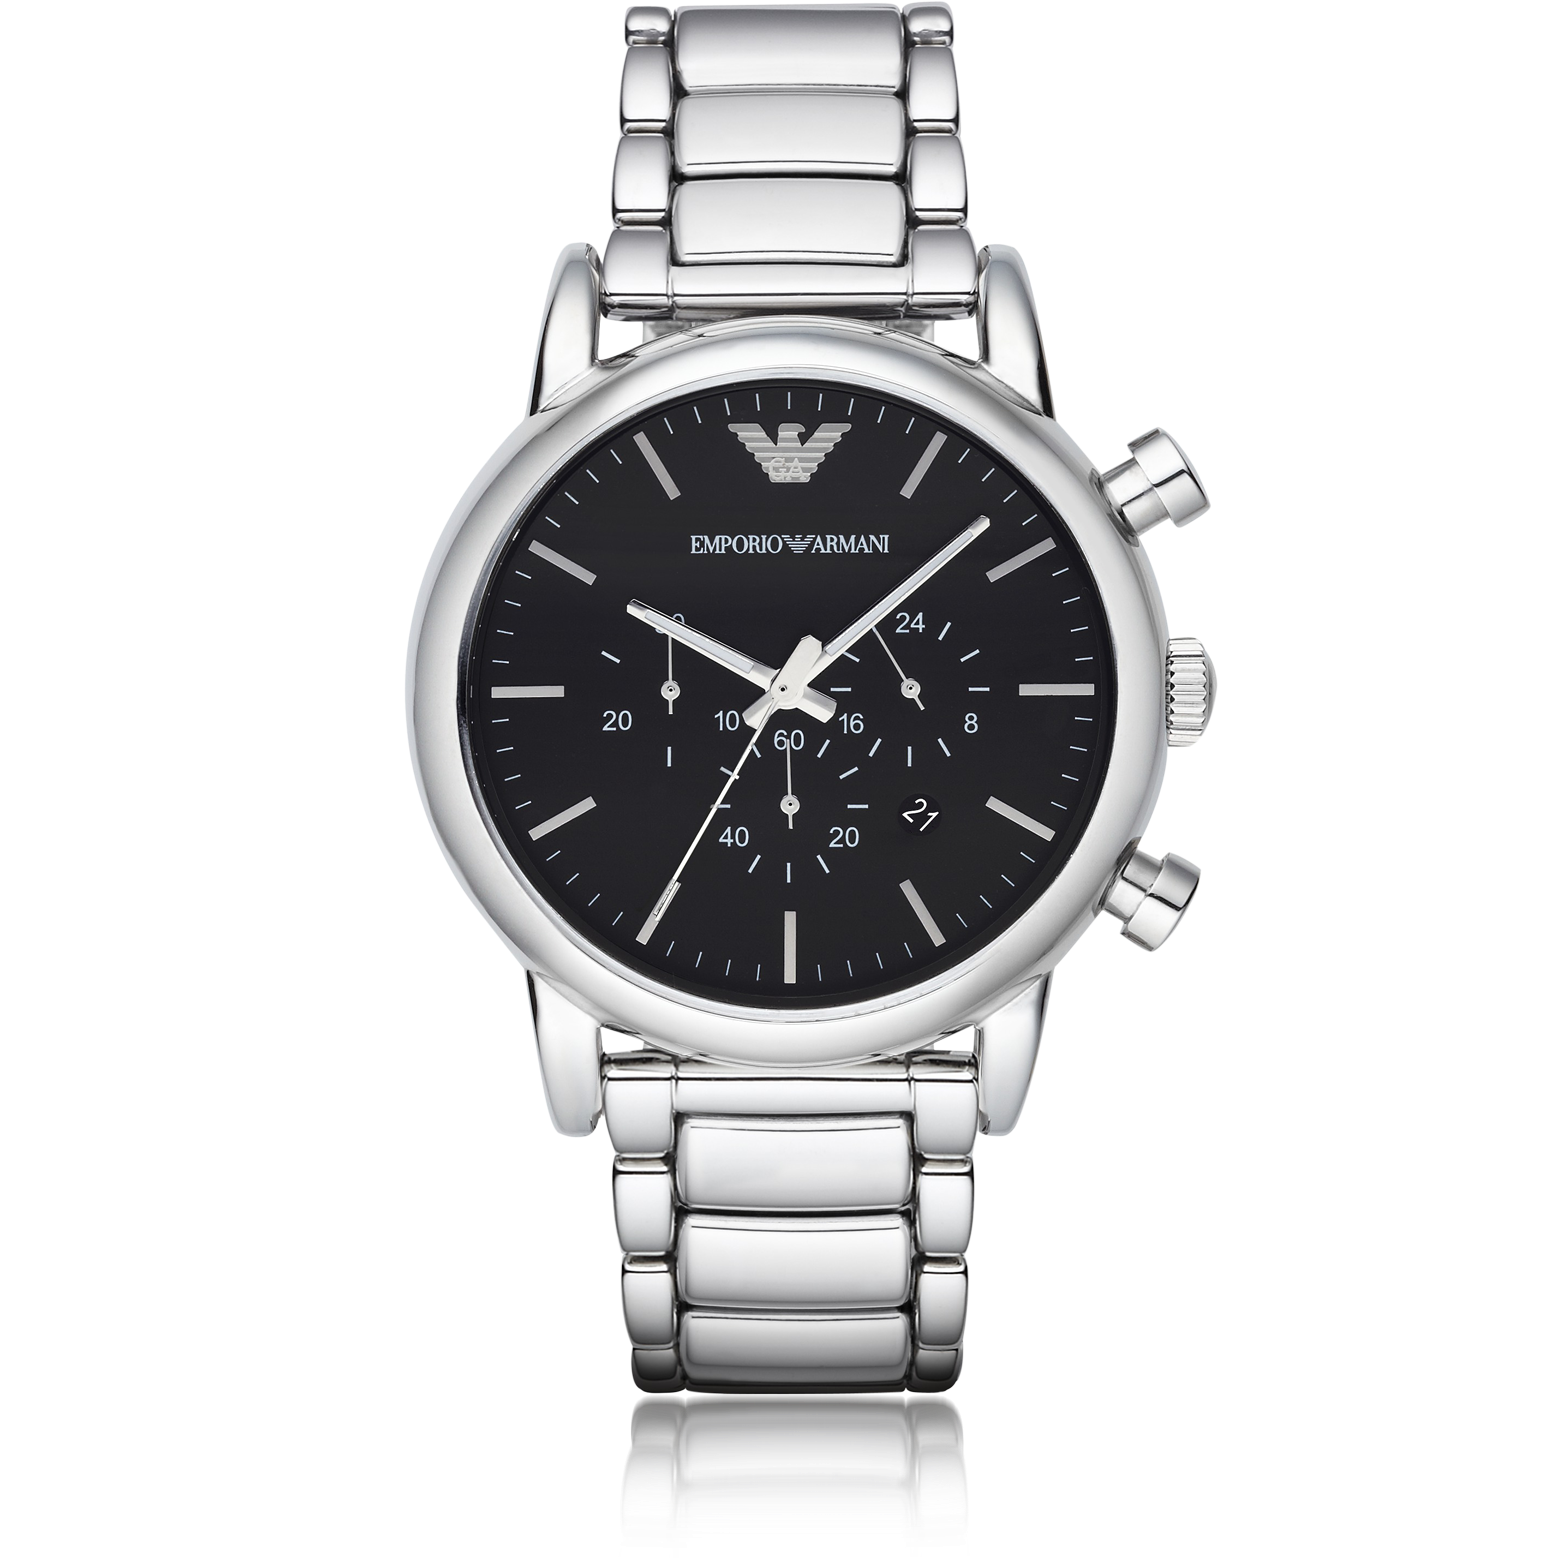 Emporio Armani Silvertone Stainless Steel Men's Watch w/Black Dial at ...